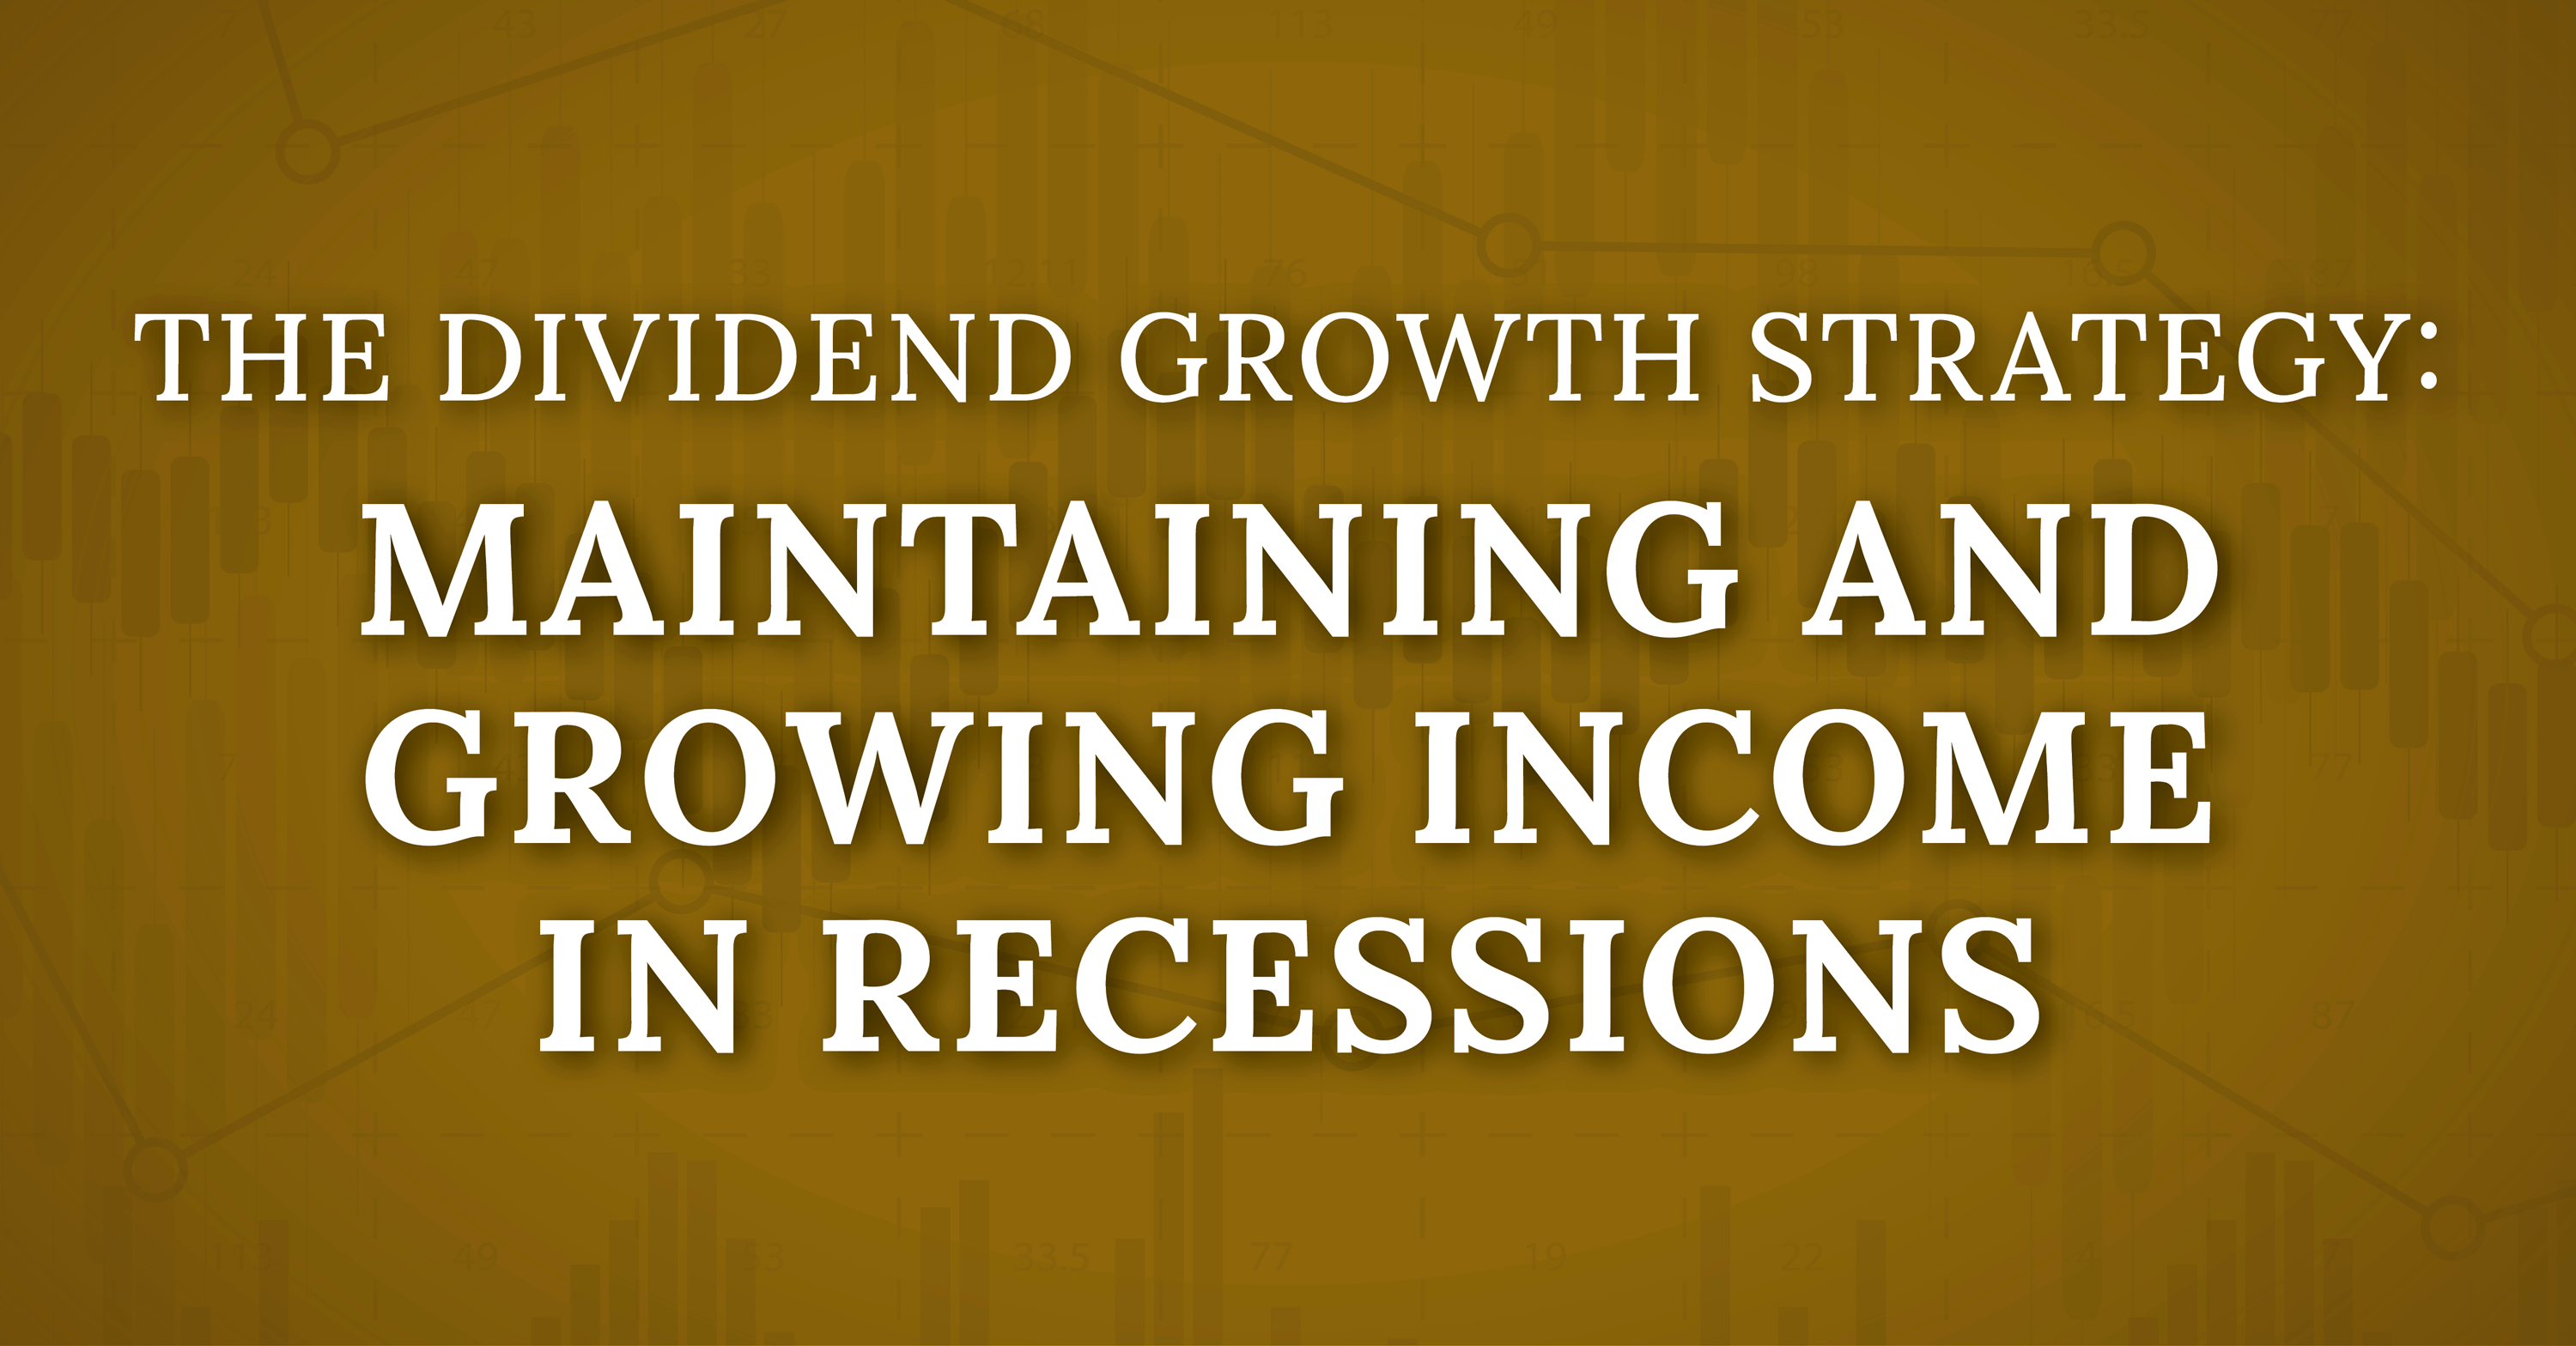 The Dividend Growth Strategy: Maintaining and Growing Income in Recessions